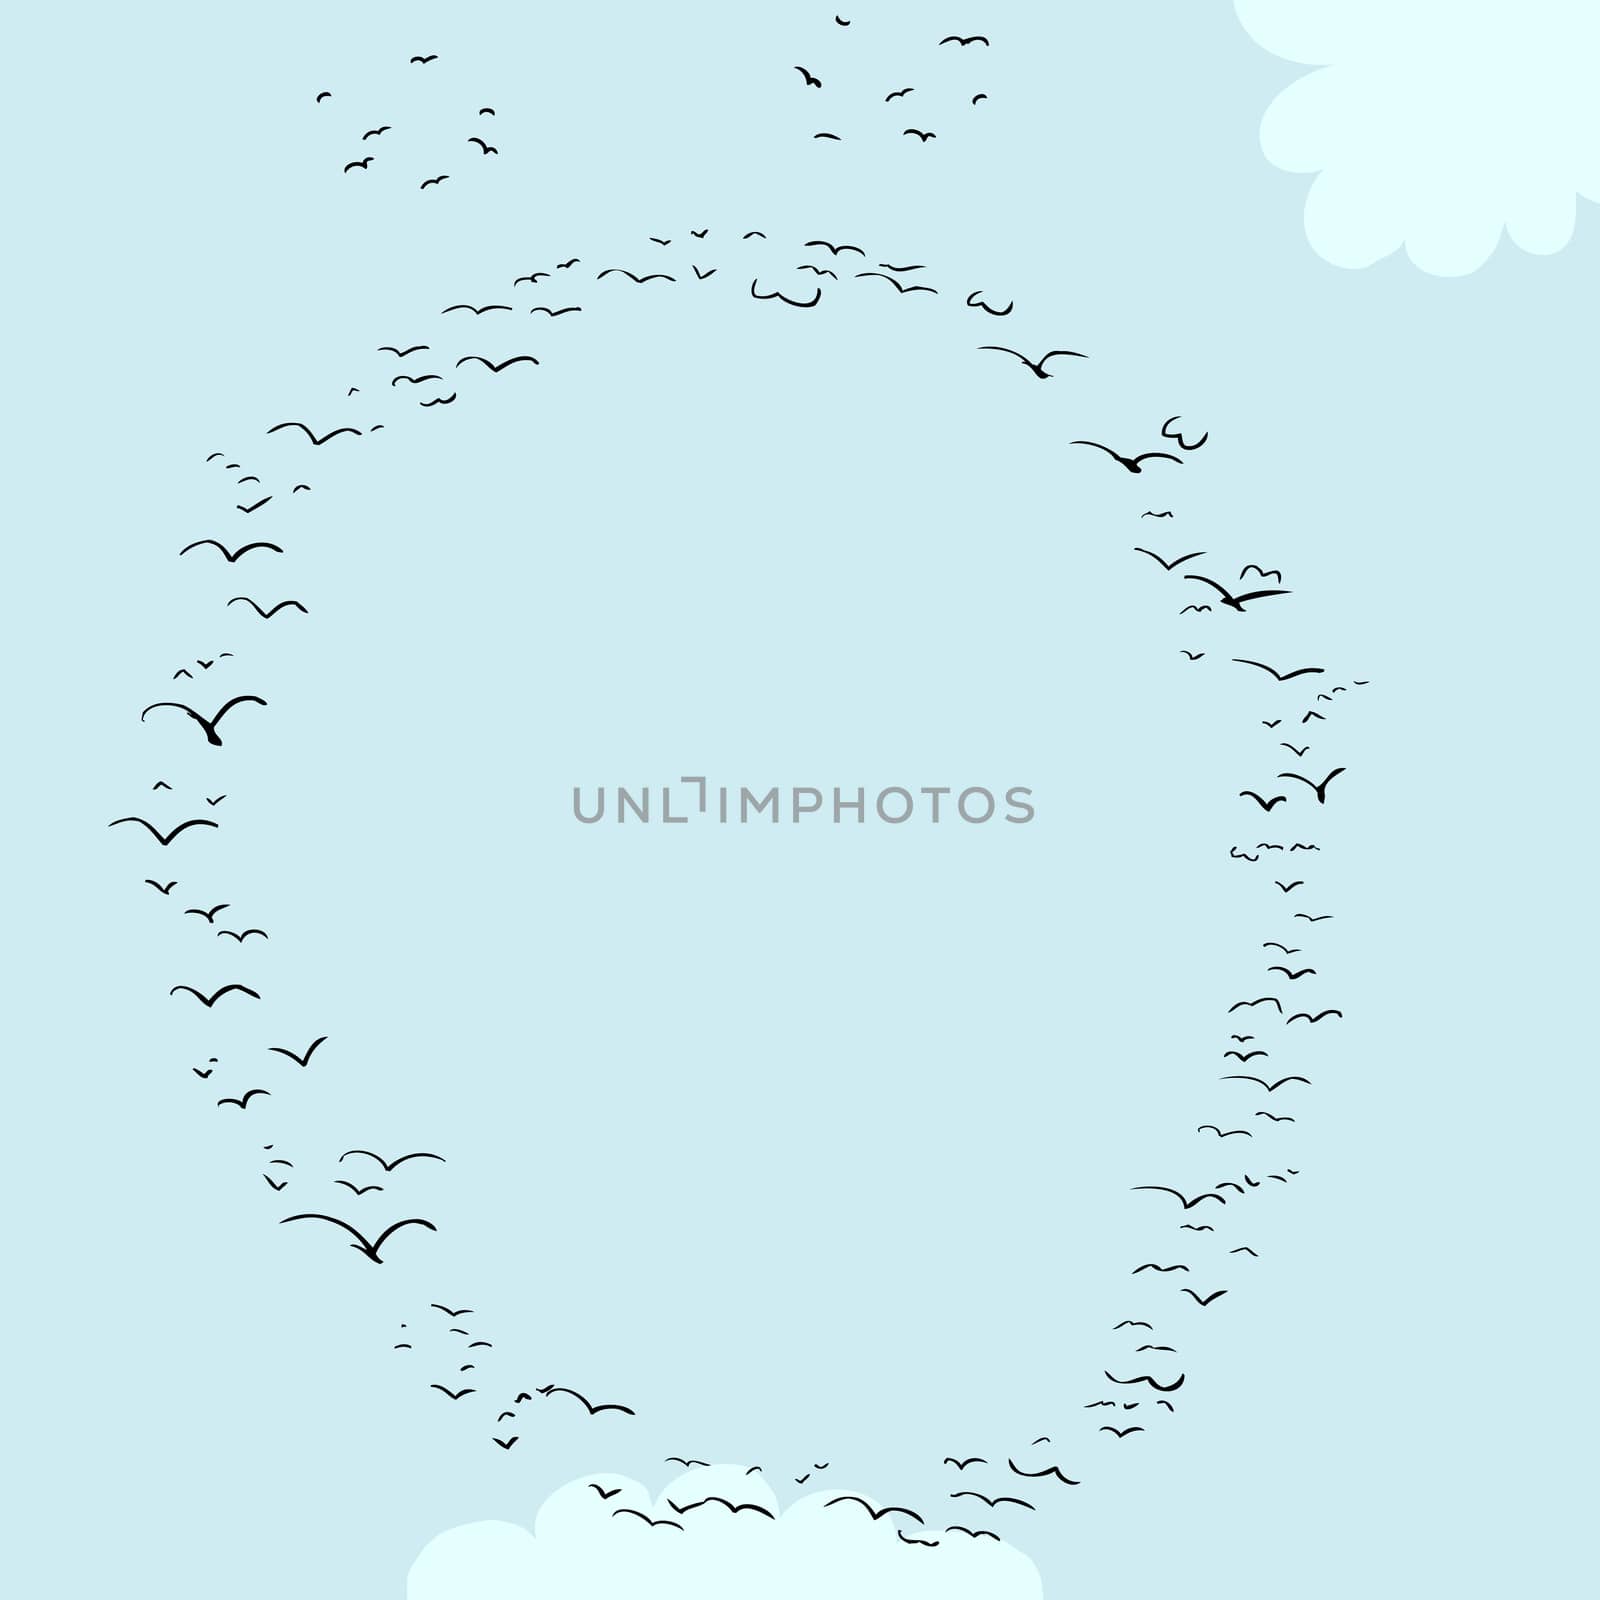 Illustration of a flock of birds in the shape of the letter diaeresis o